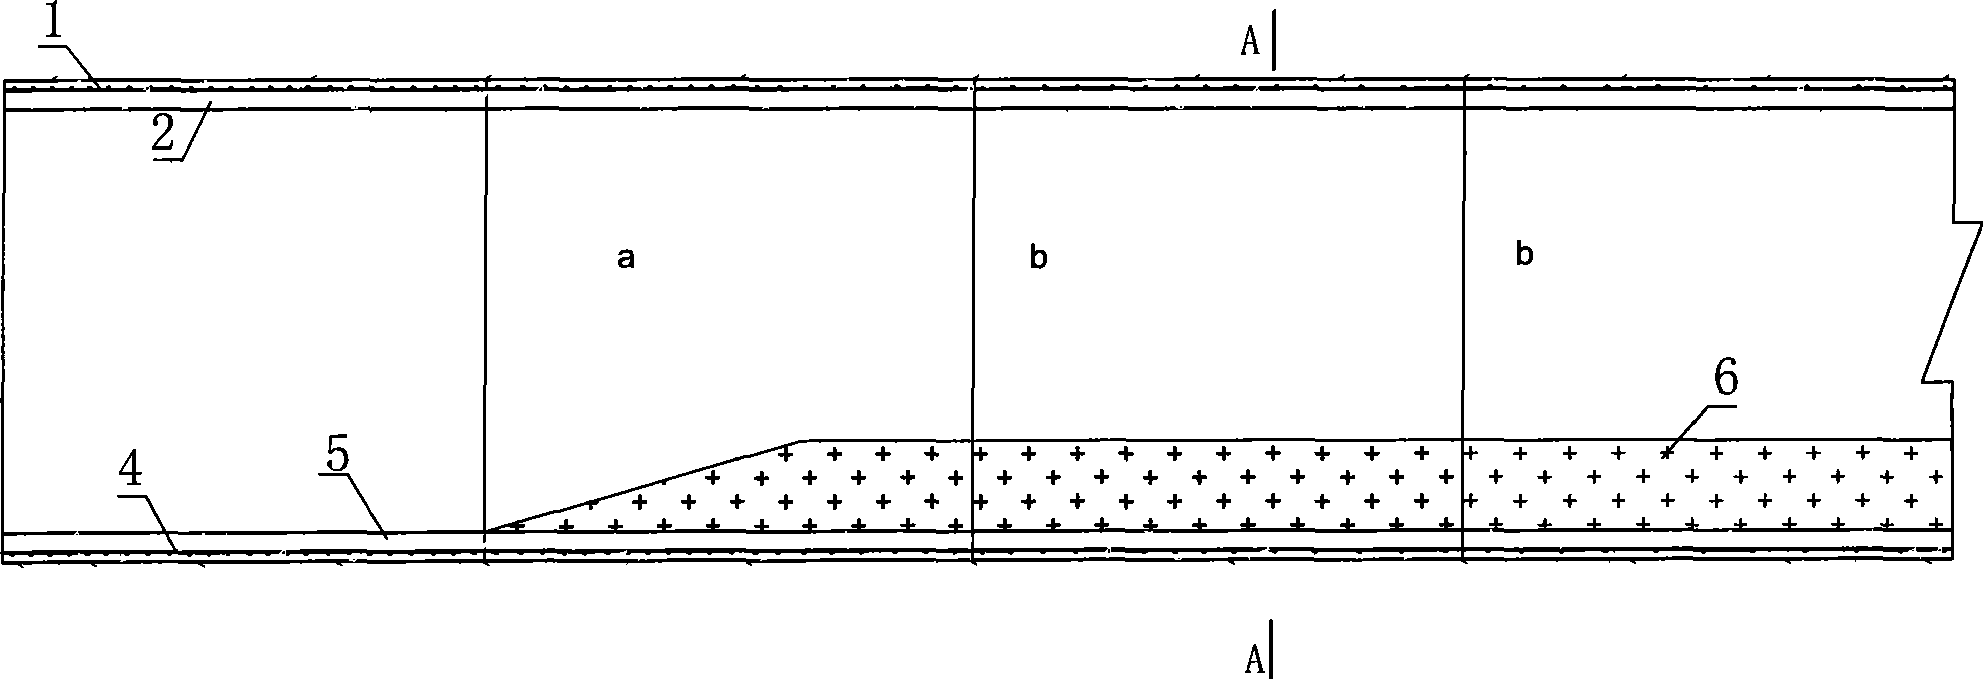 High-speed construction method of tunnel lining concrete